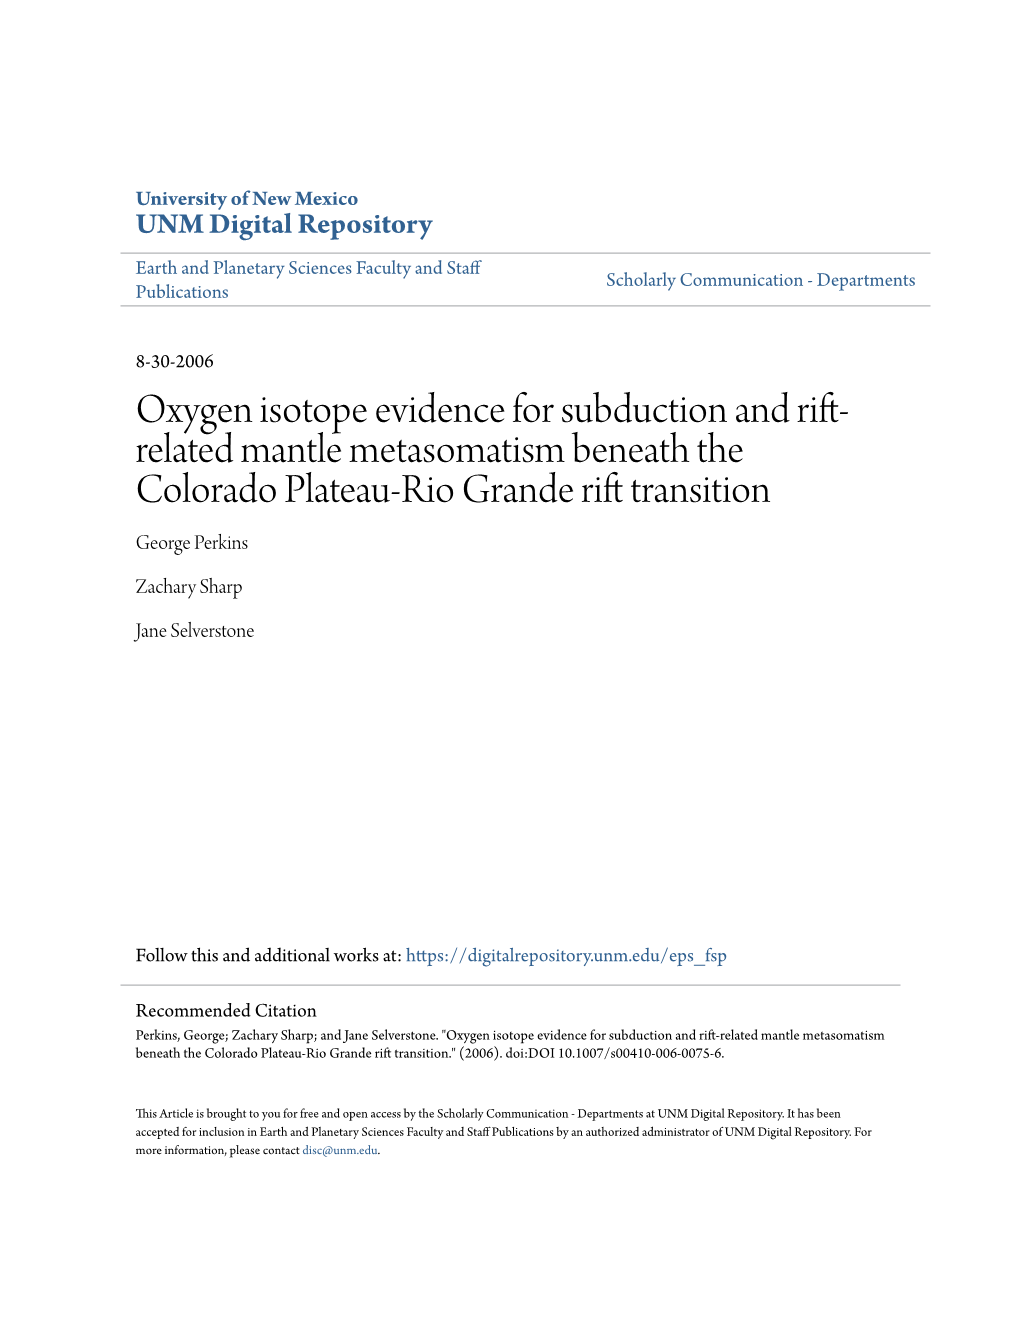 Oxygen Isotope Evidence for Subduction and Rift-Related Mantle Metasomatism Beneath the Colorado Plateau-Rio Grande Rift Transition." (2006)